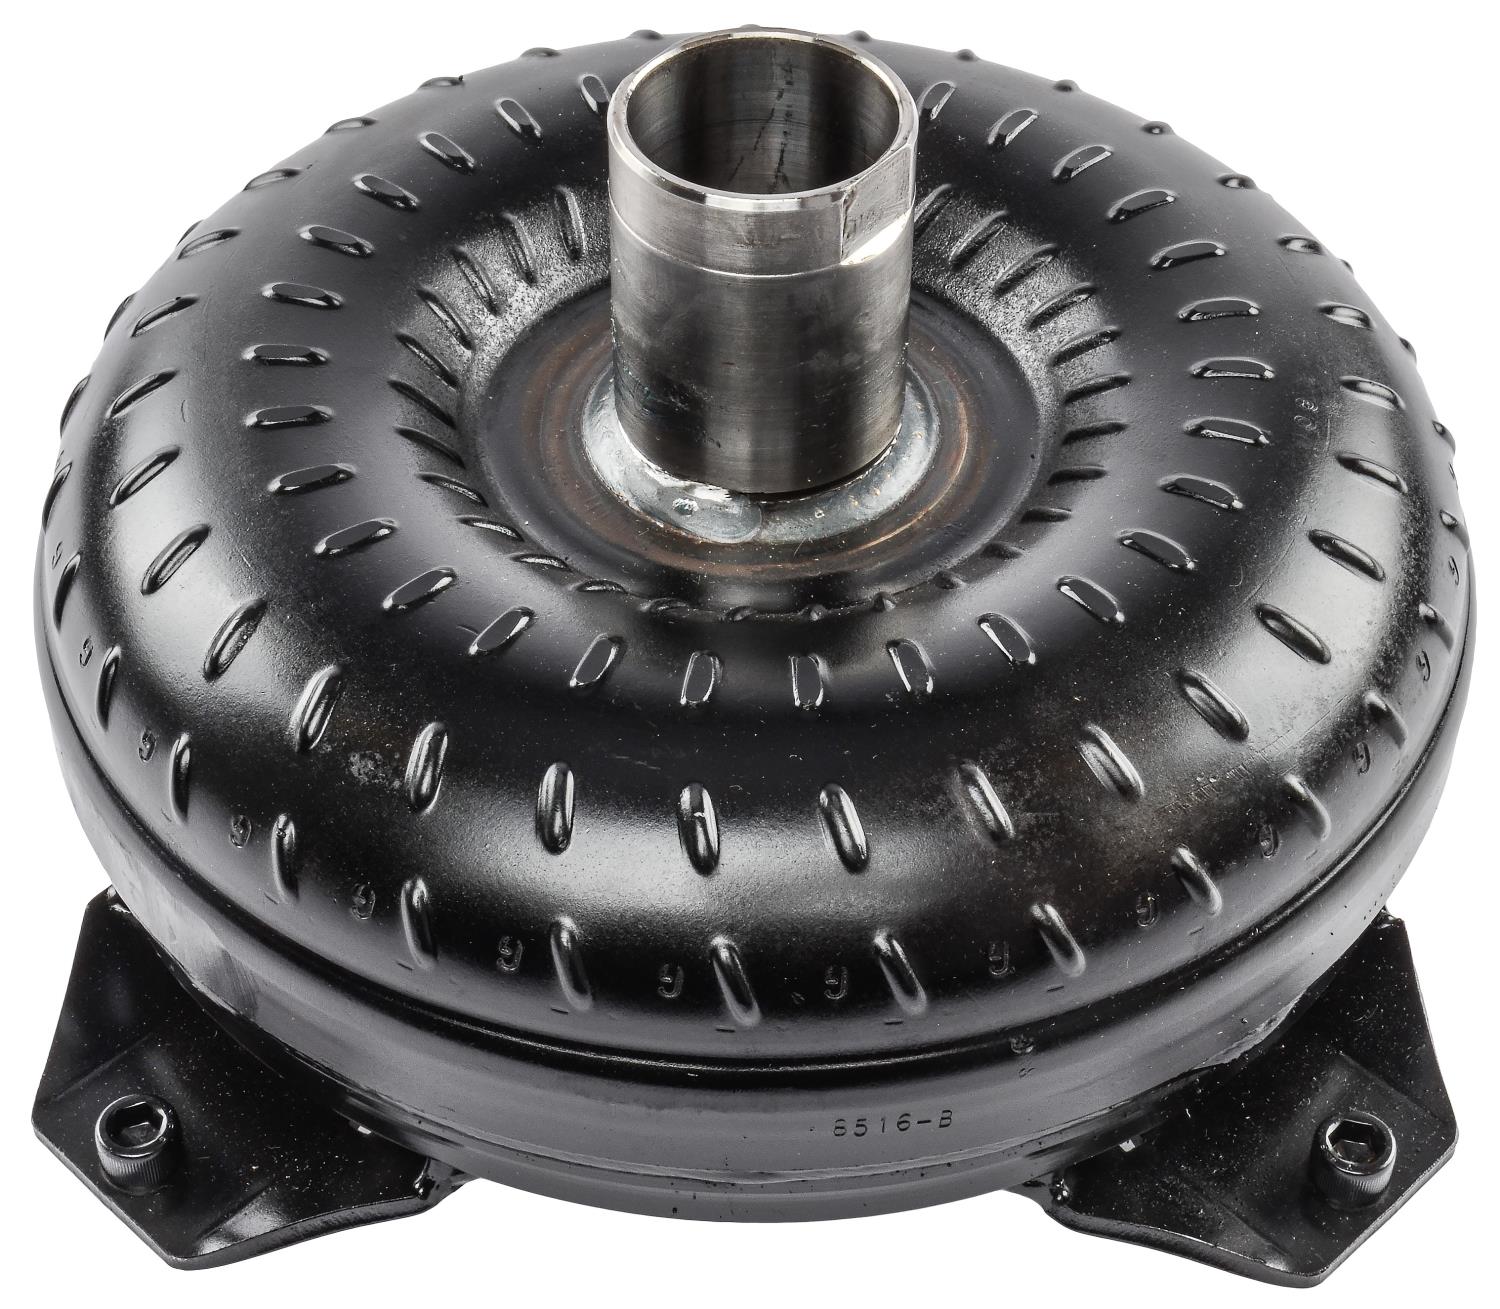 Torque Converter for Ford C6 [10 in. Dia. & 2400-2600 RPM Stall Speed]